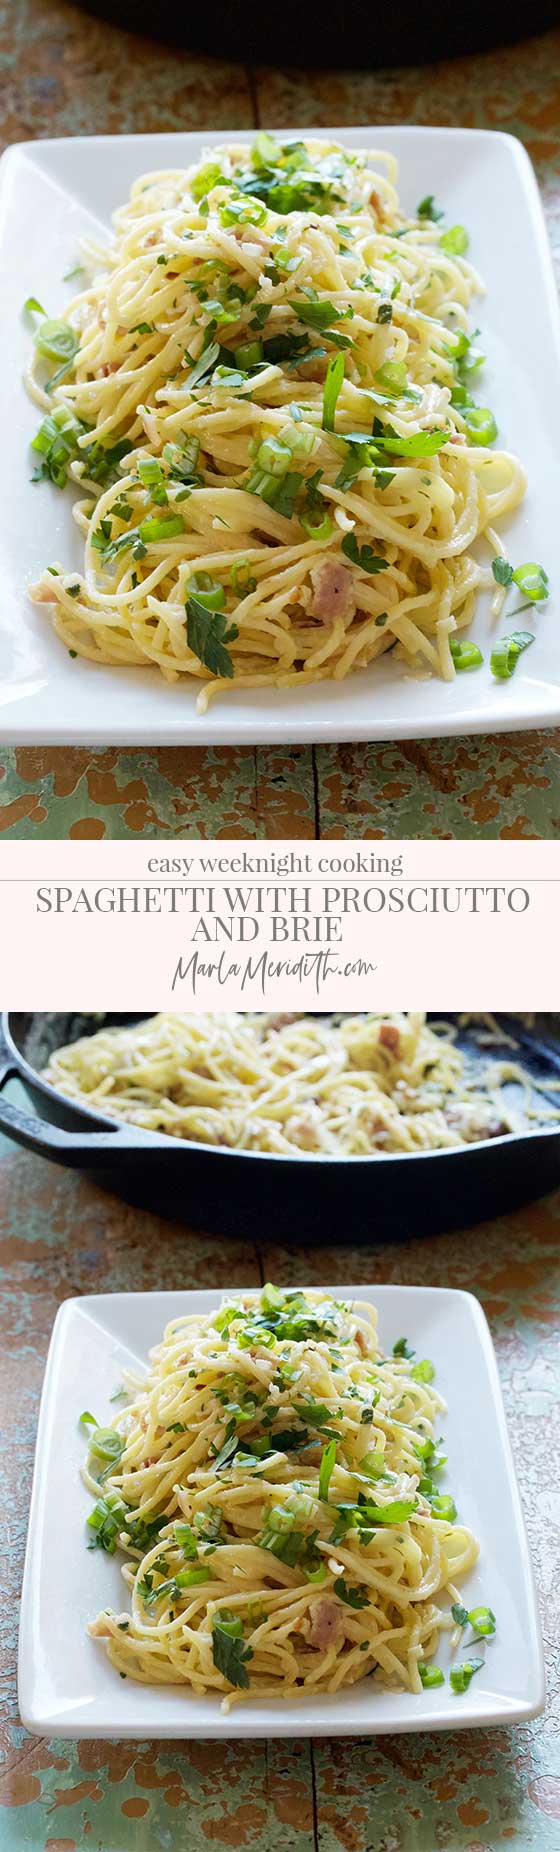 Spaghetti with Prosciutto and Brie recipe, a delicious comfort food dish that is simple and quick to prepare. Perfect for cold winter weeknight meals. MarlaMeridith.com